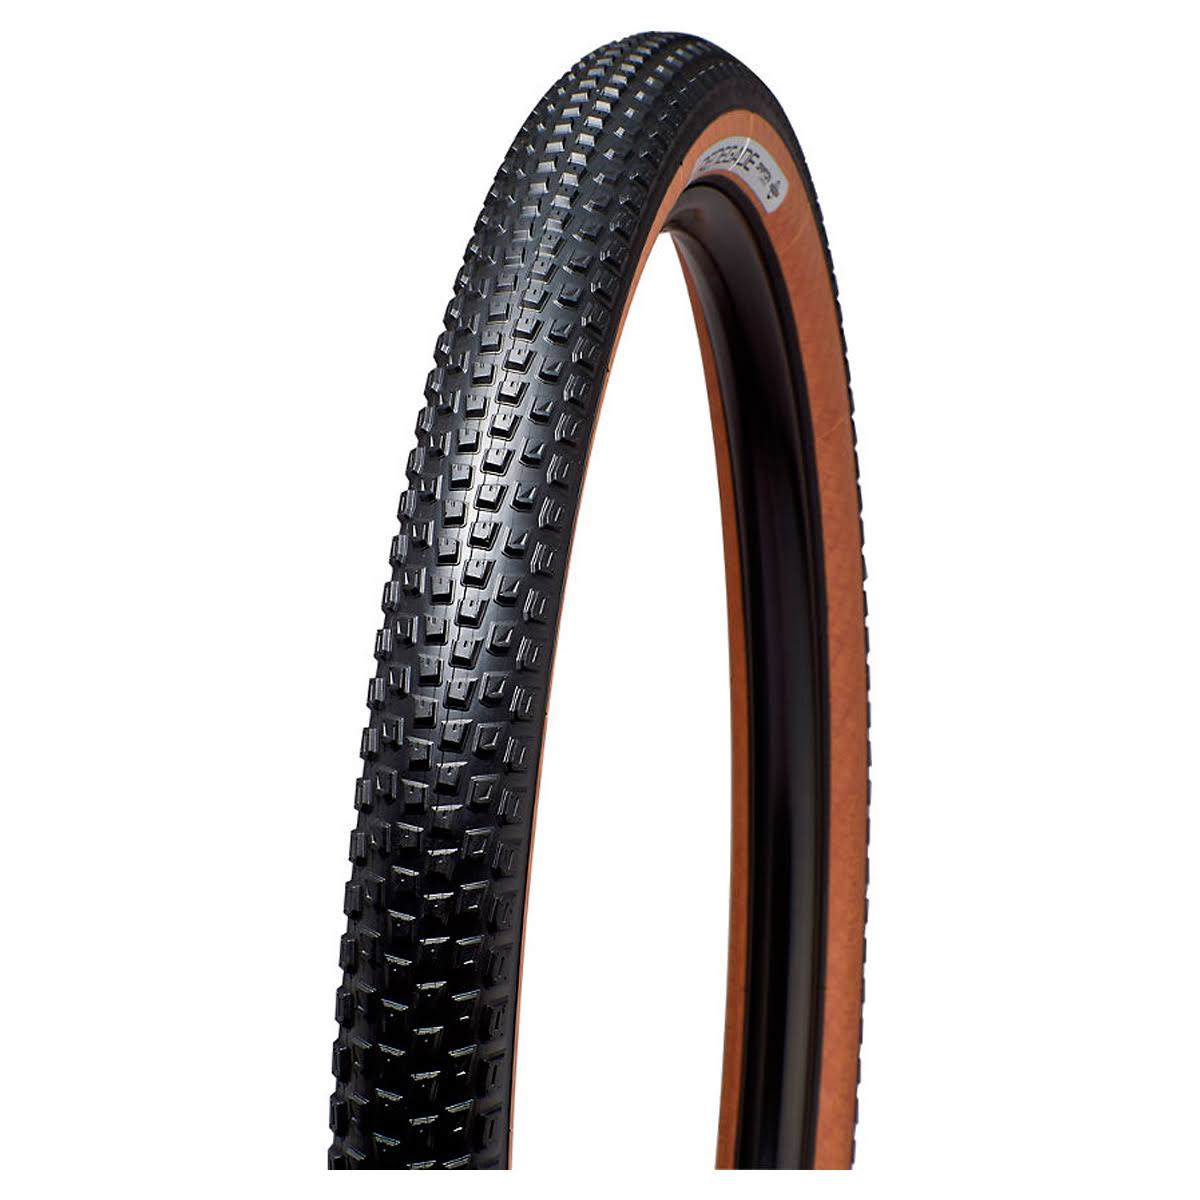 Specialized Renegade 2Bliss Ready 29" Tyre Measure 29x2.3 Colour Black Brown